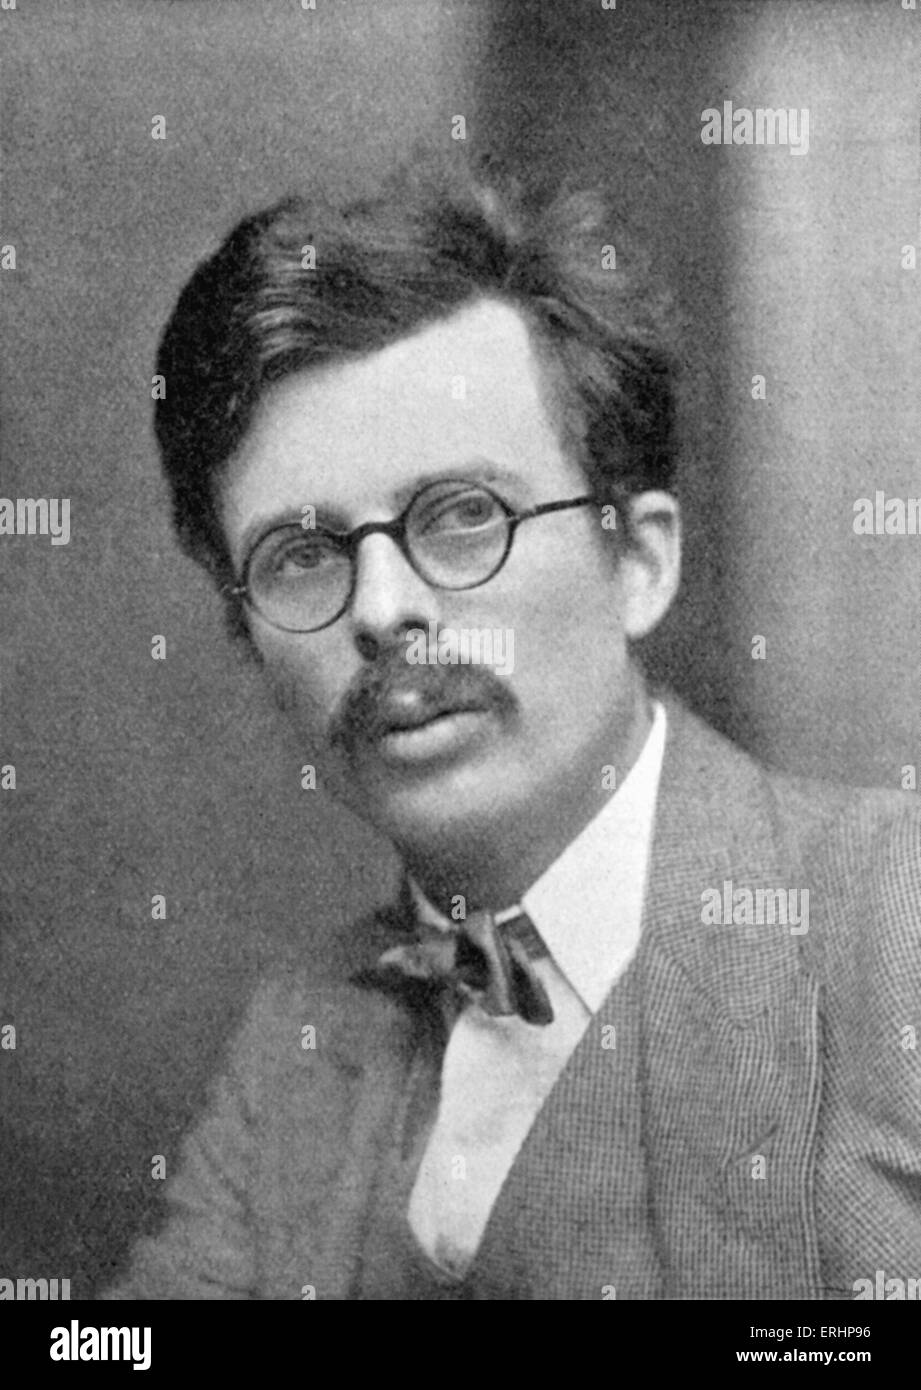 Image result for aldous huxley